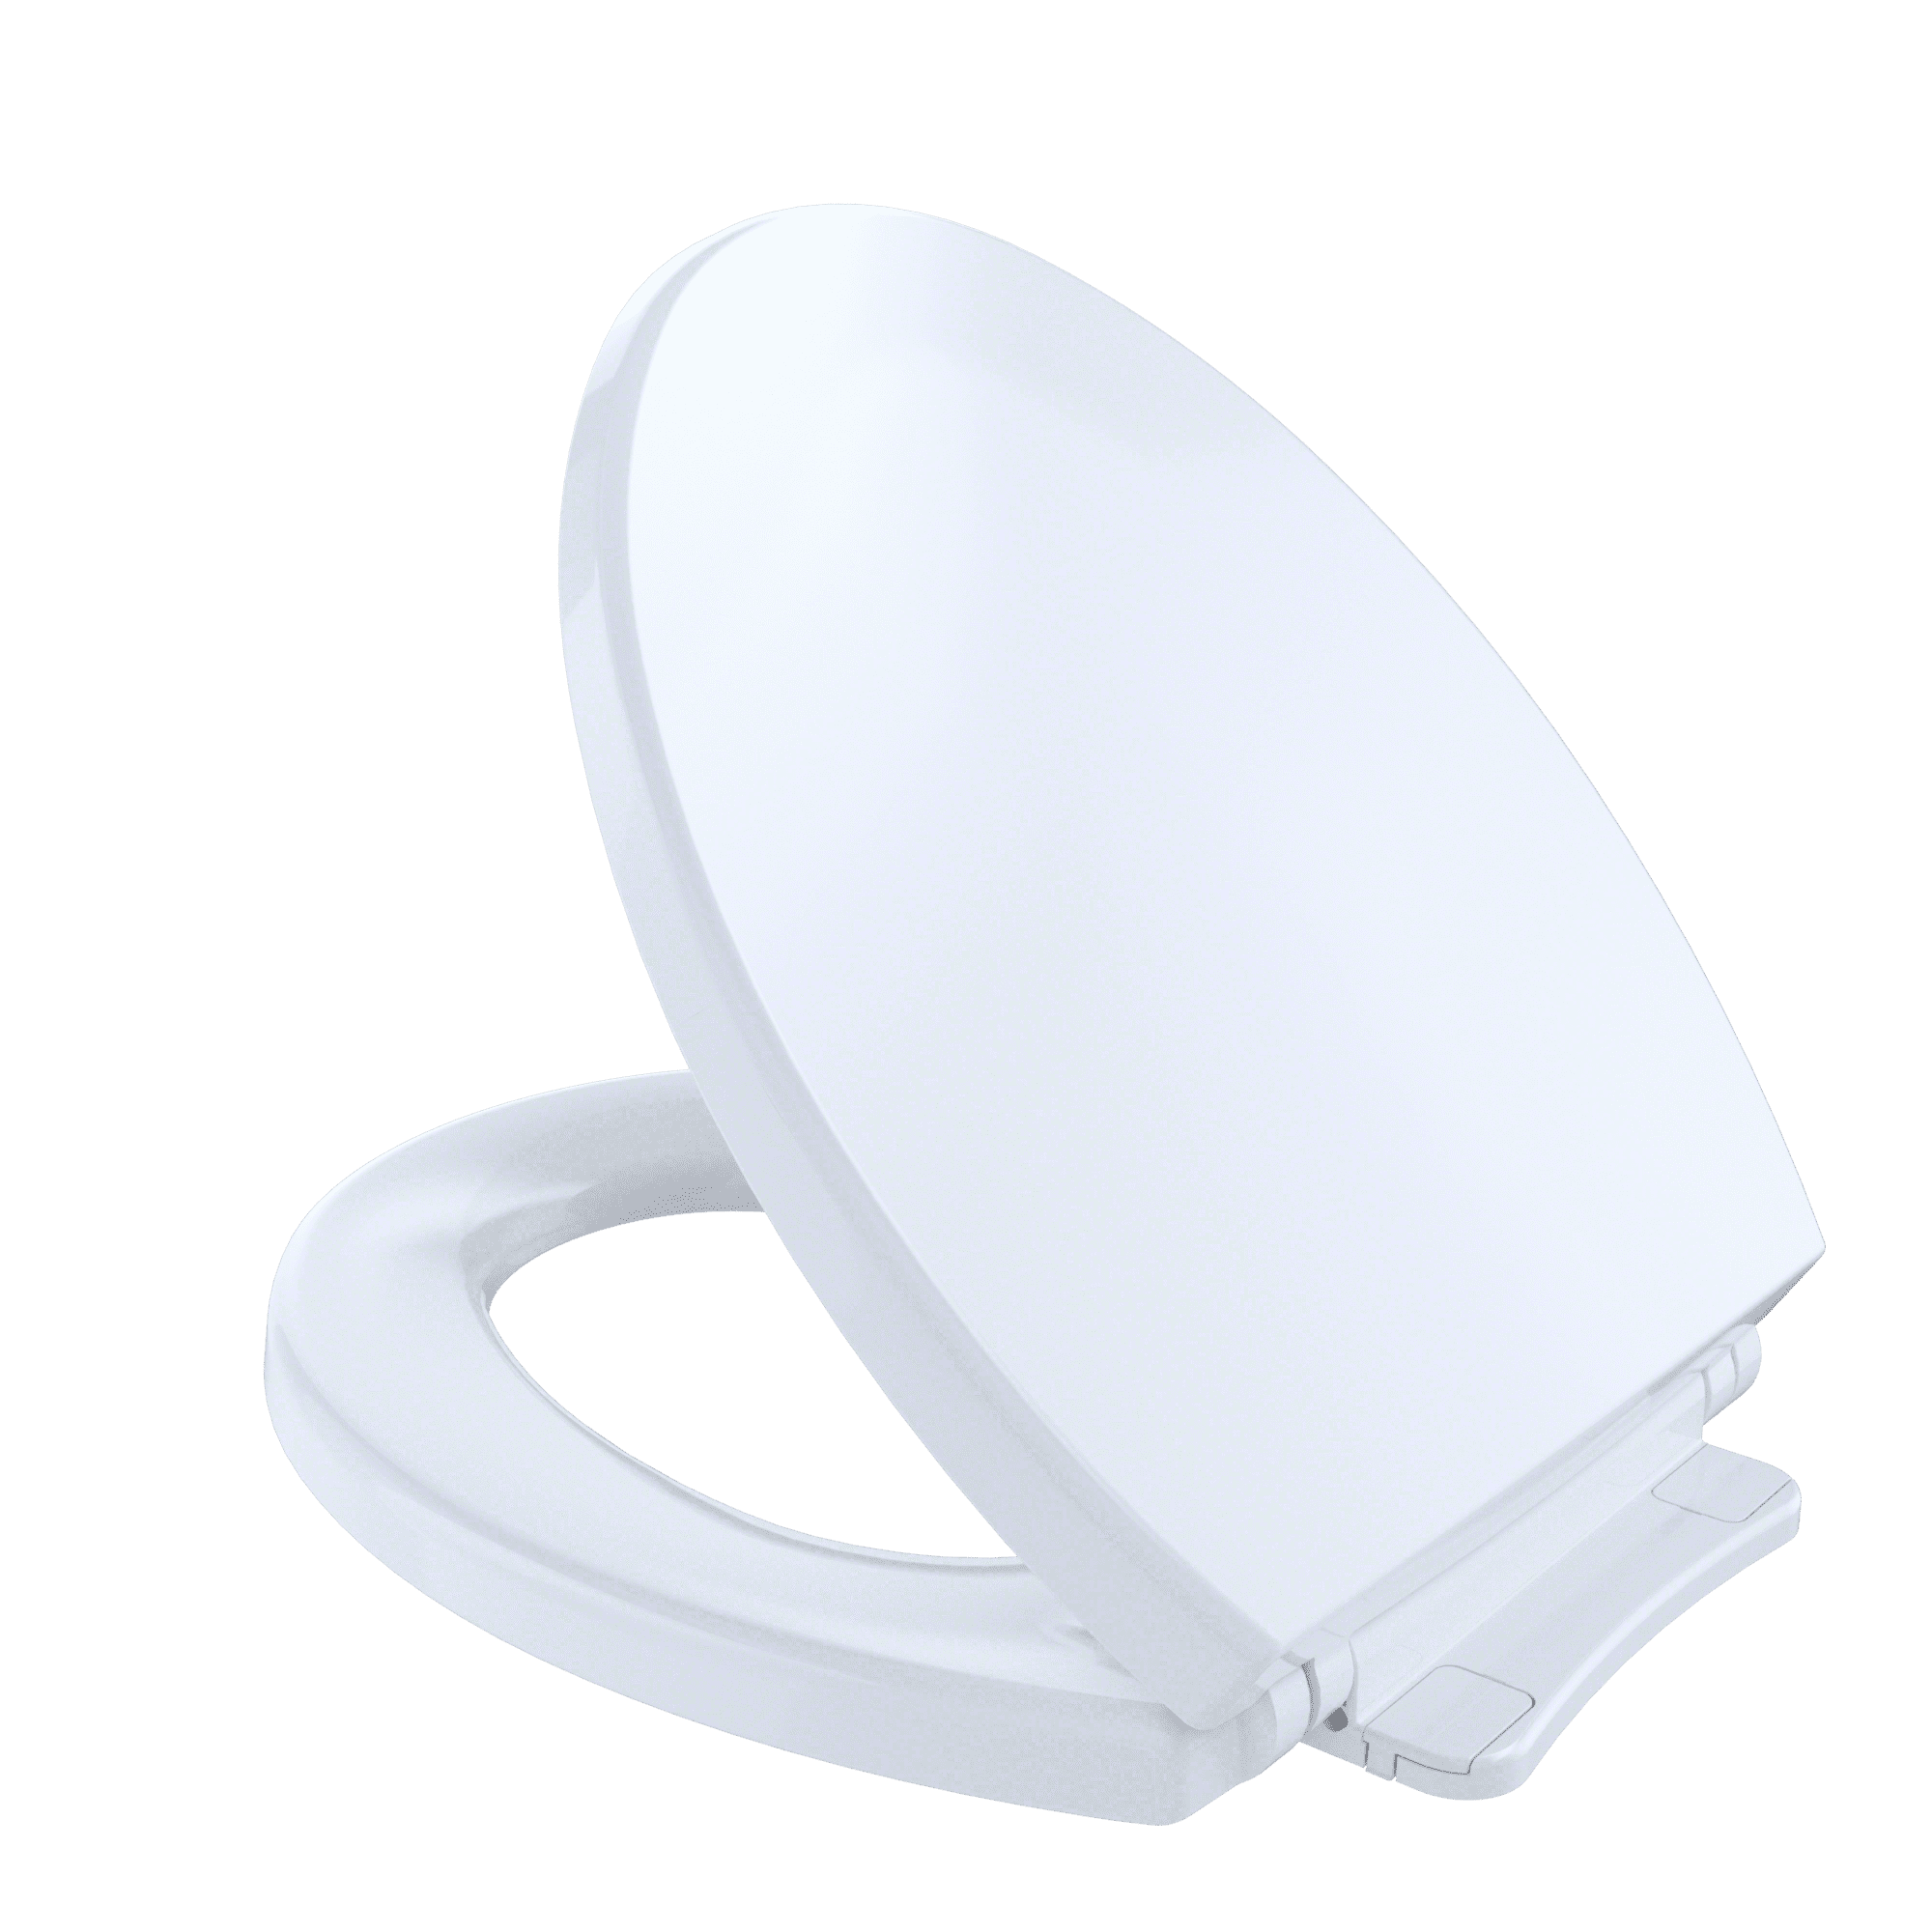 toilet seat with slow release lid